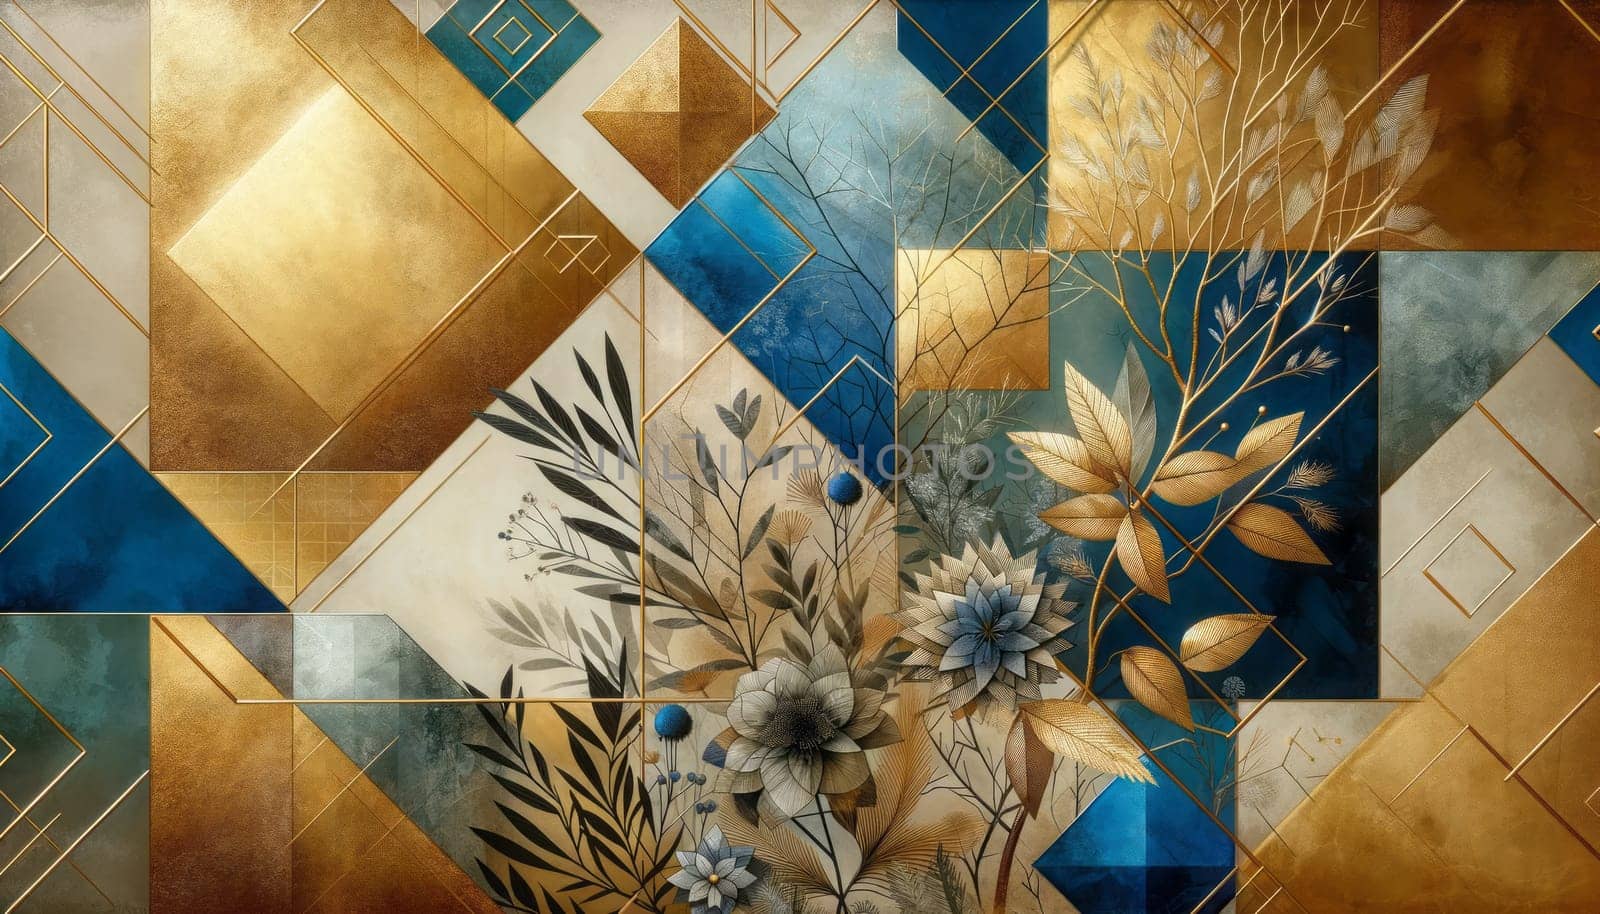 An abstract digital illustration blending geometric shapes and organic elements. The composition features a gold and blue color palette, with metallic gold squares and deep blue rhombuses overlaid on top of each other creating a patchwork effect. Interspersed among the geometric shapes are delicate, detailed botanical illustrations of branches with leaves and flowers, imbuing the artwork with a sense of natural elegance. The overall effect is one of a harmonious fusion between structured geometry and the wild, organic beauty of plants.